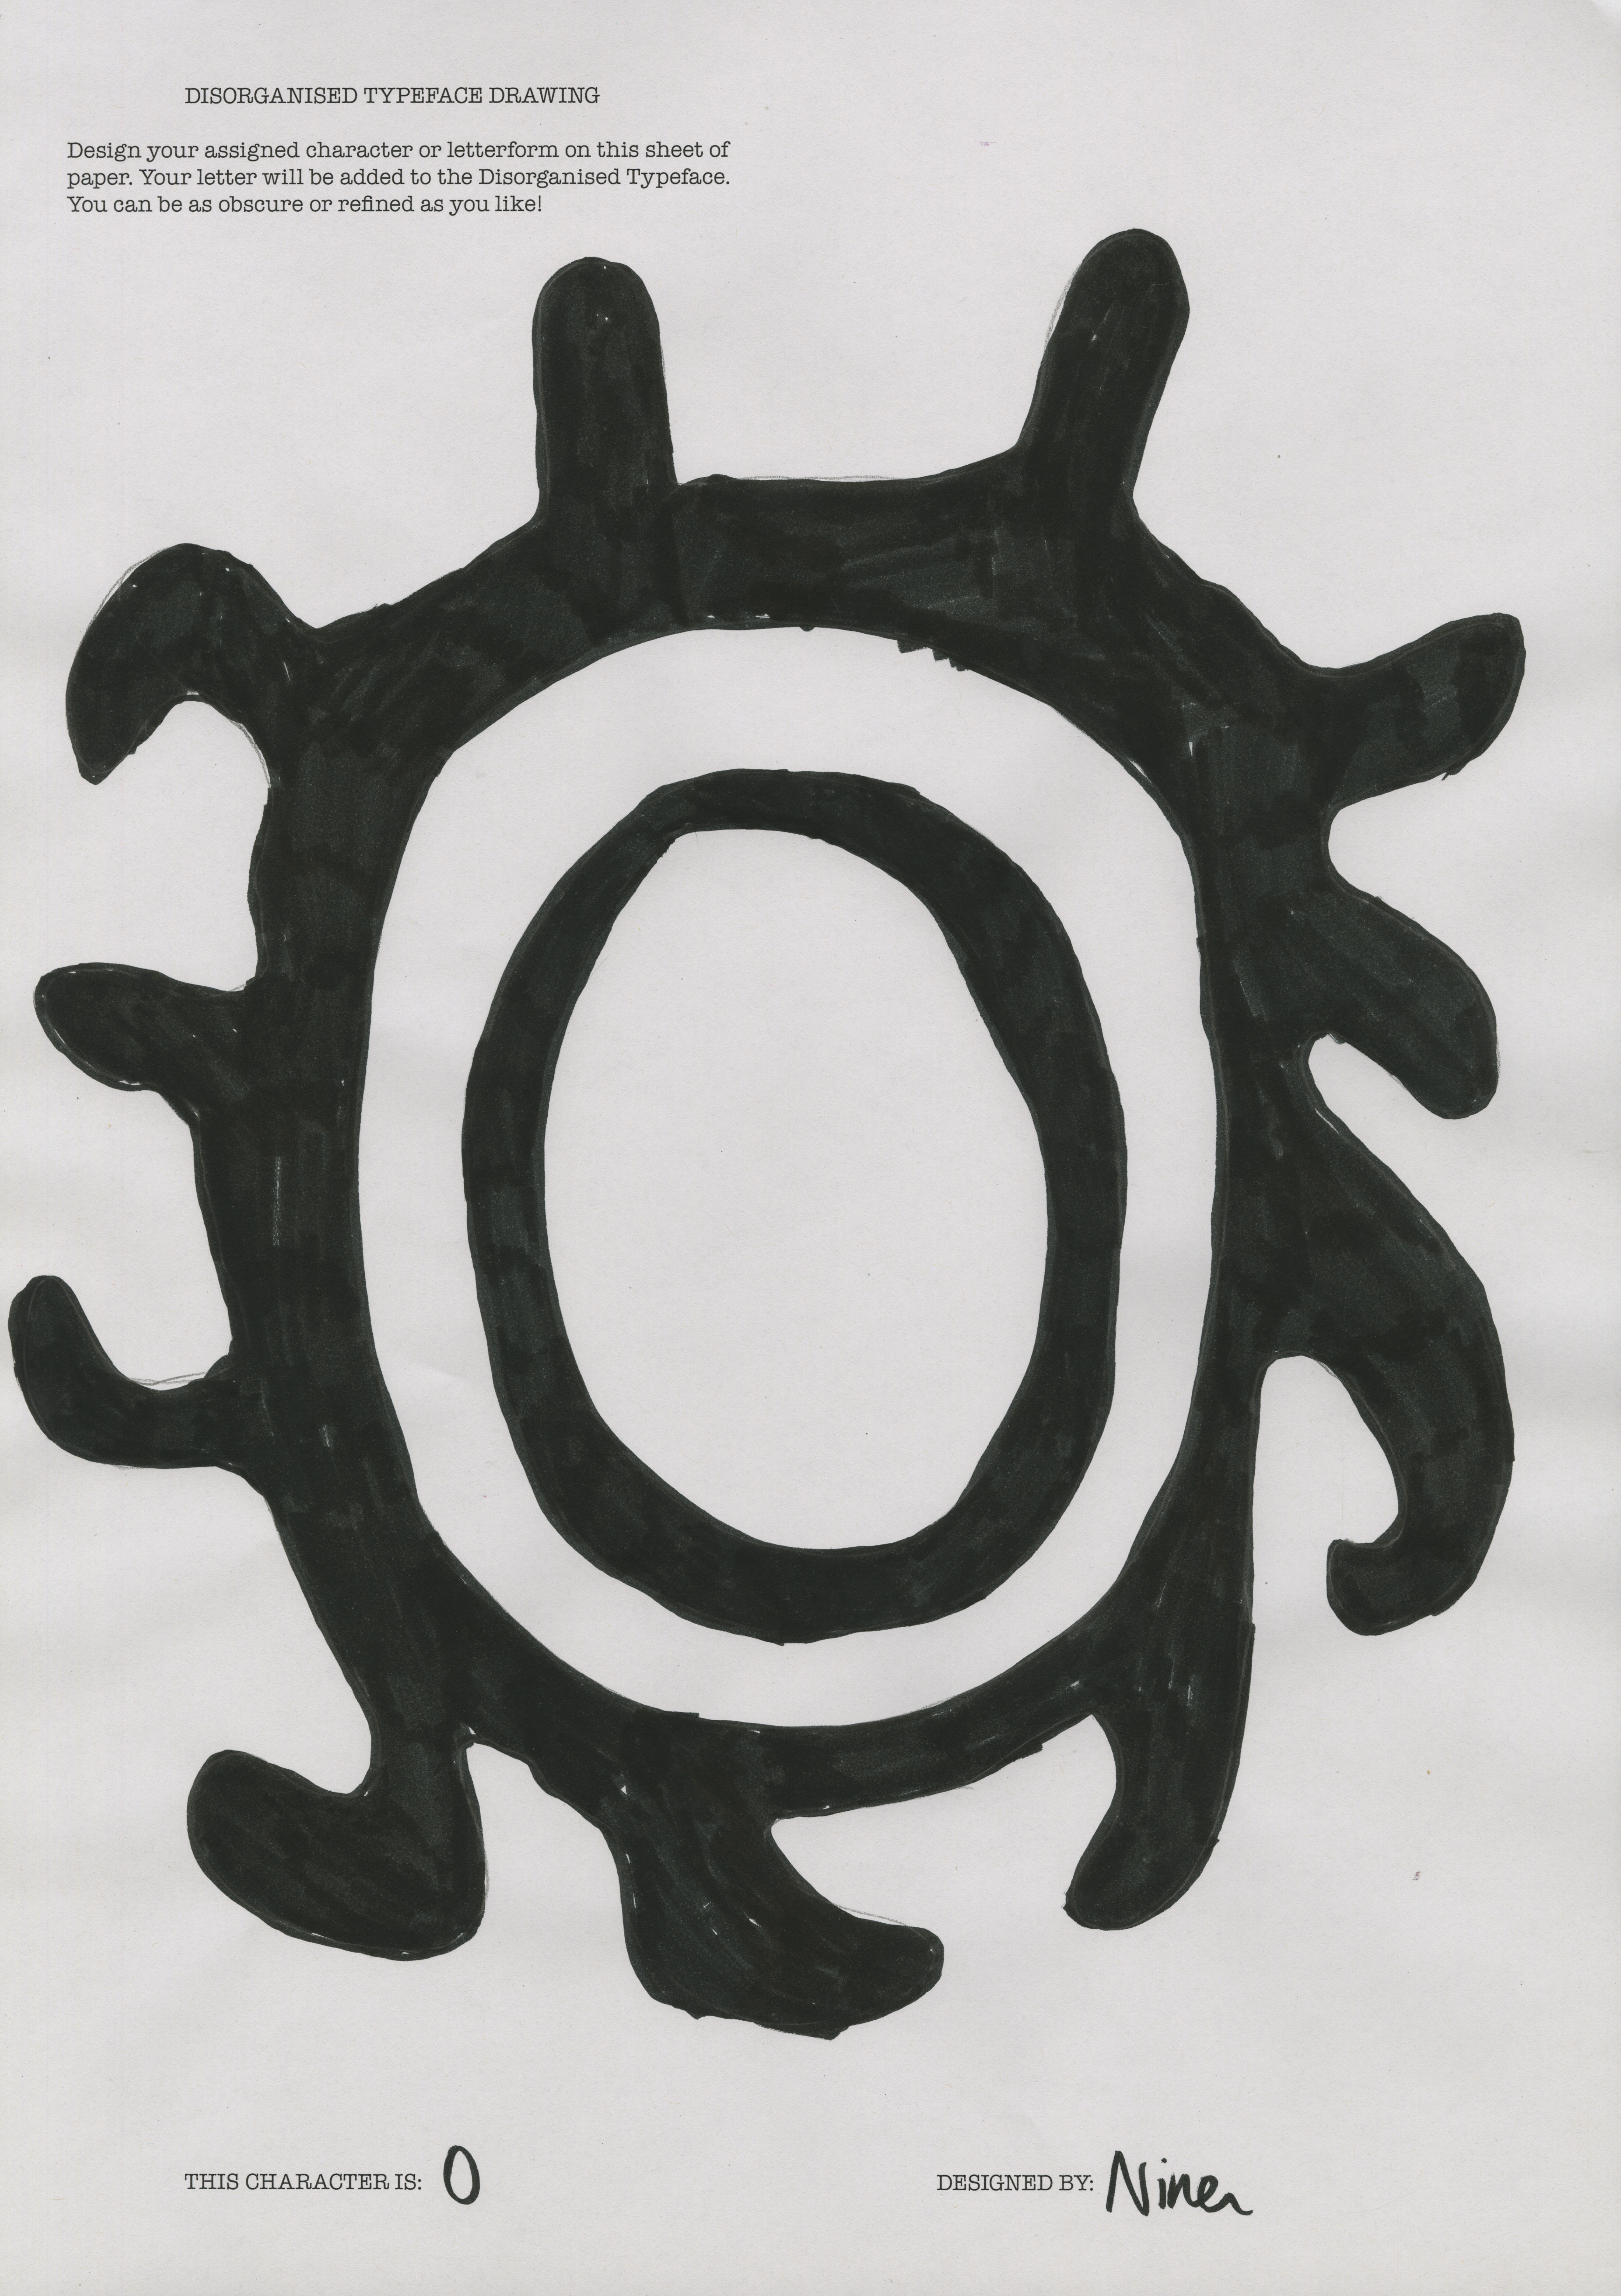 A scan of a poster with a hand-drawn letter 'O' in squigly shape.